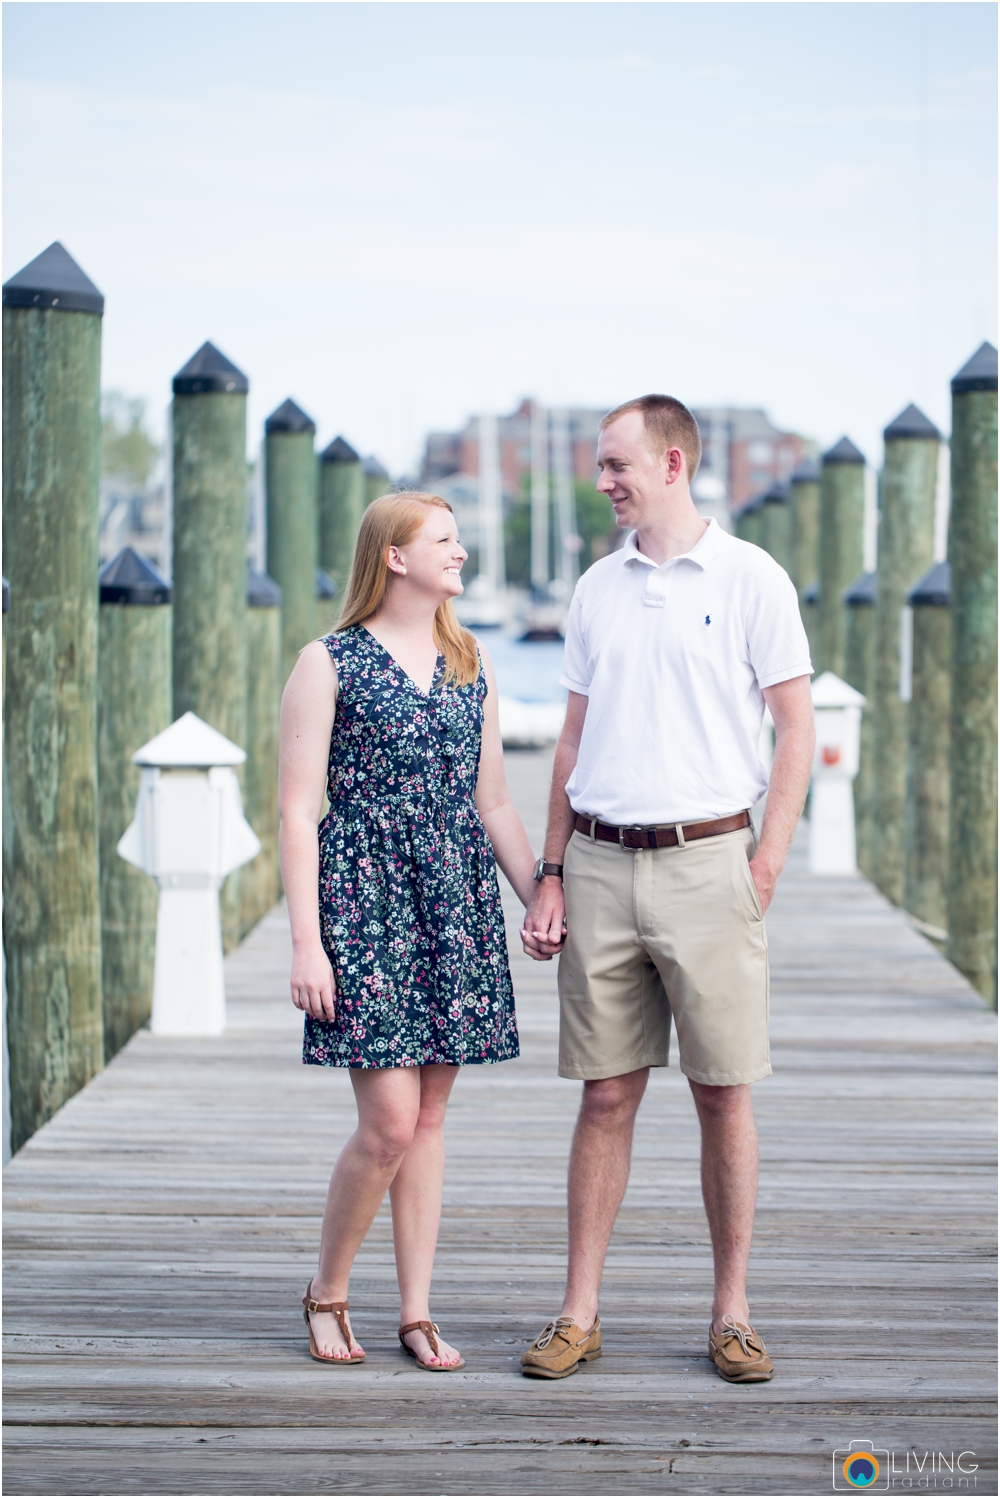 casey-clark-engaged-annapolis-downtown-naval-academy-engagement-session-living-radiant-photography-maggie-patrick-nolan-outdoor-water-boats_0003.jpg